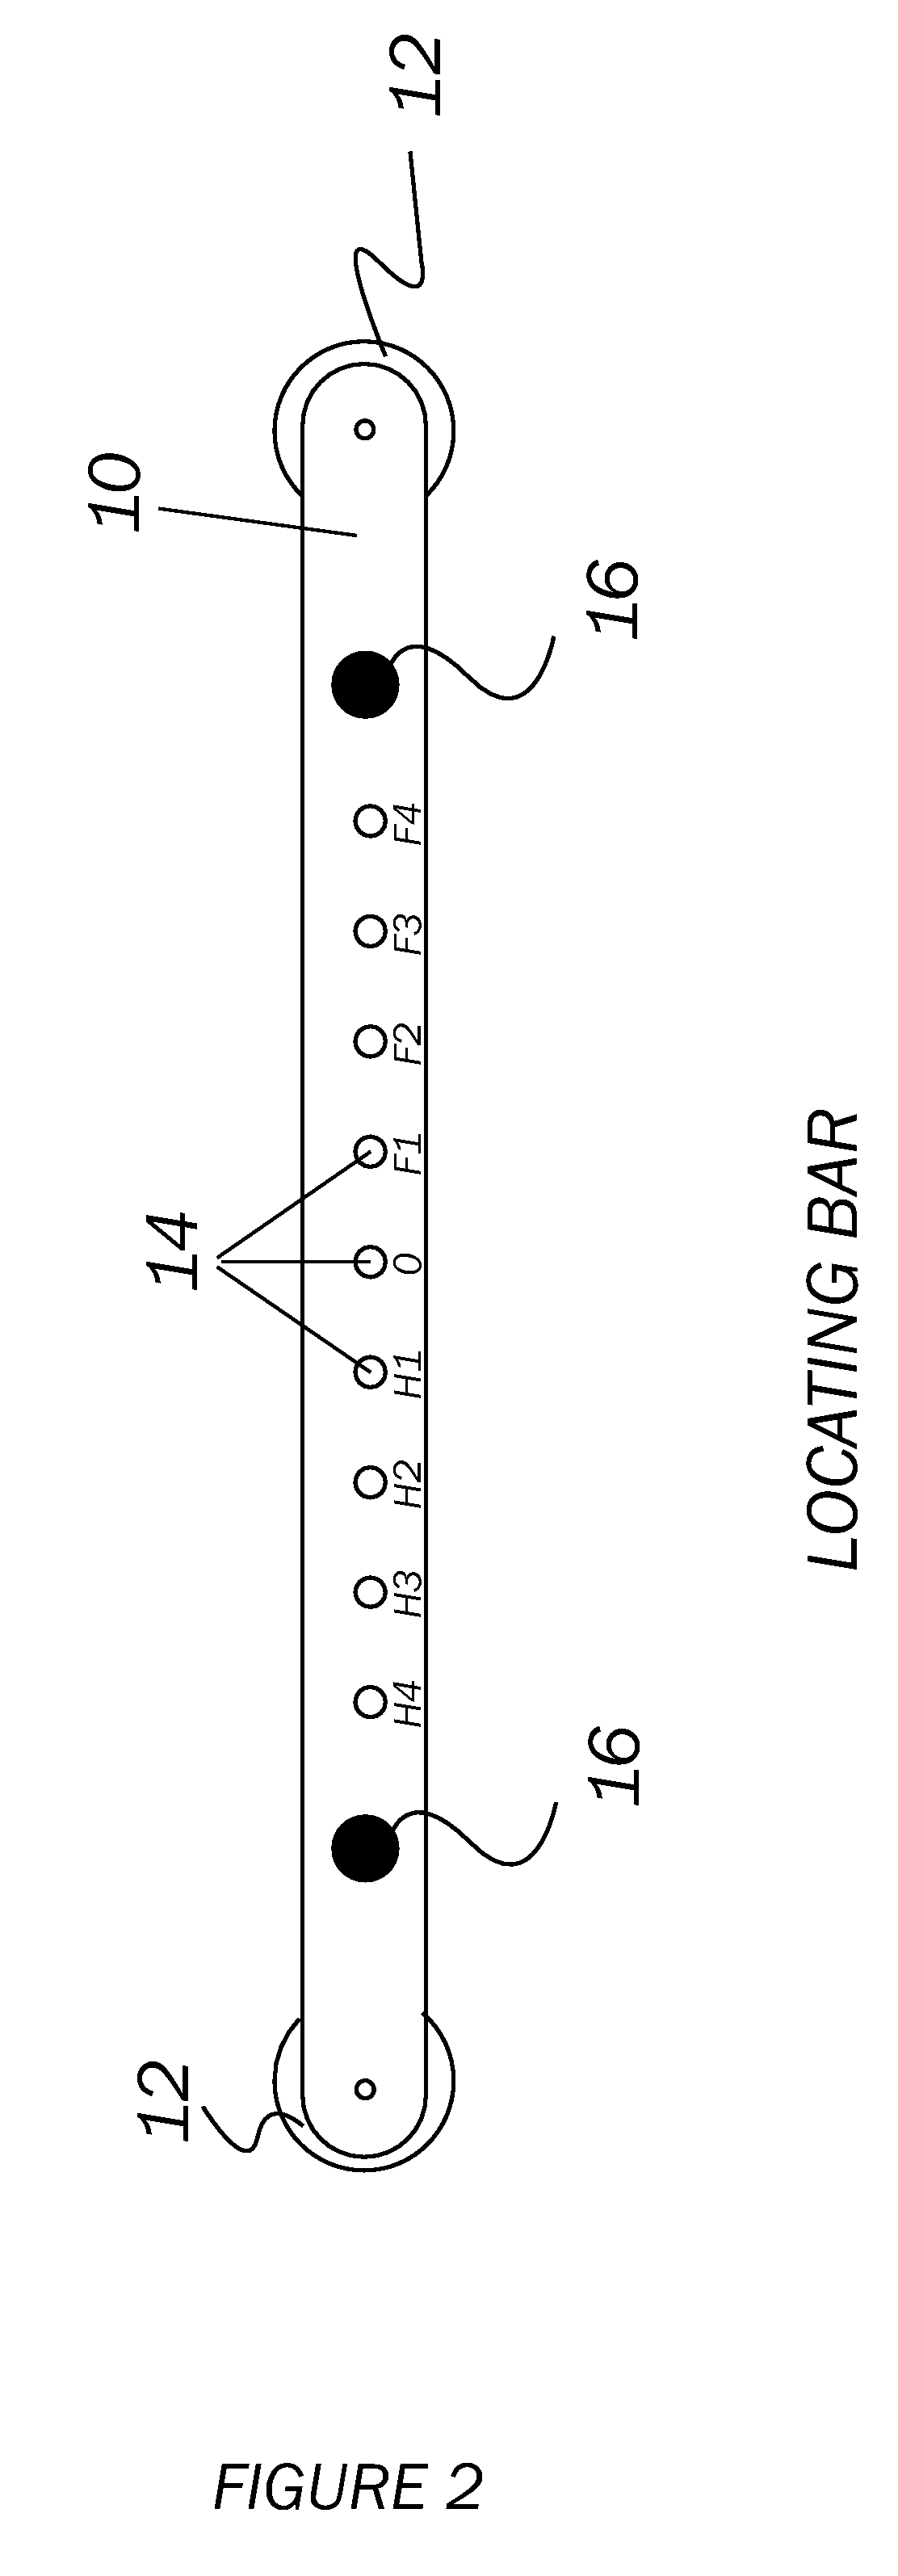 Method for Creating 3D Coordinate Systems in Image Space for Device and Patient Table Location and Verification